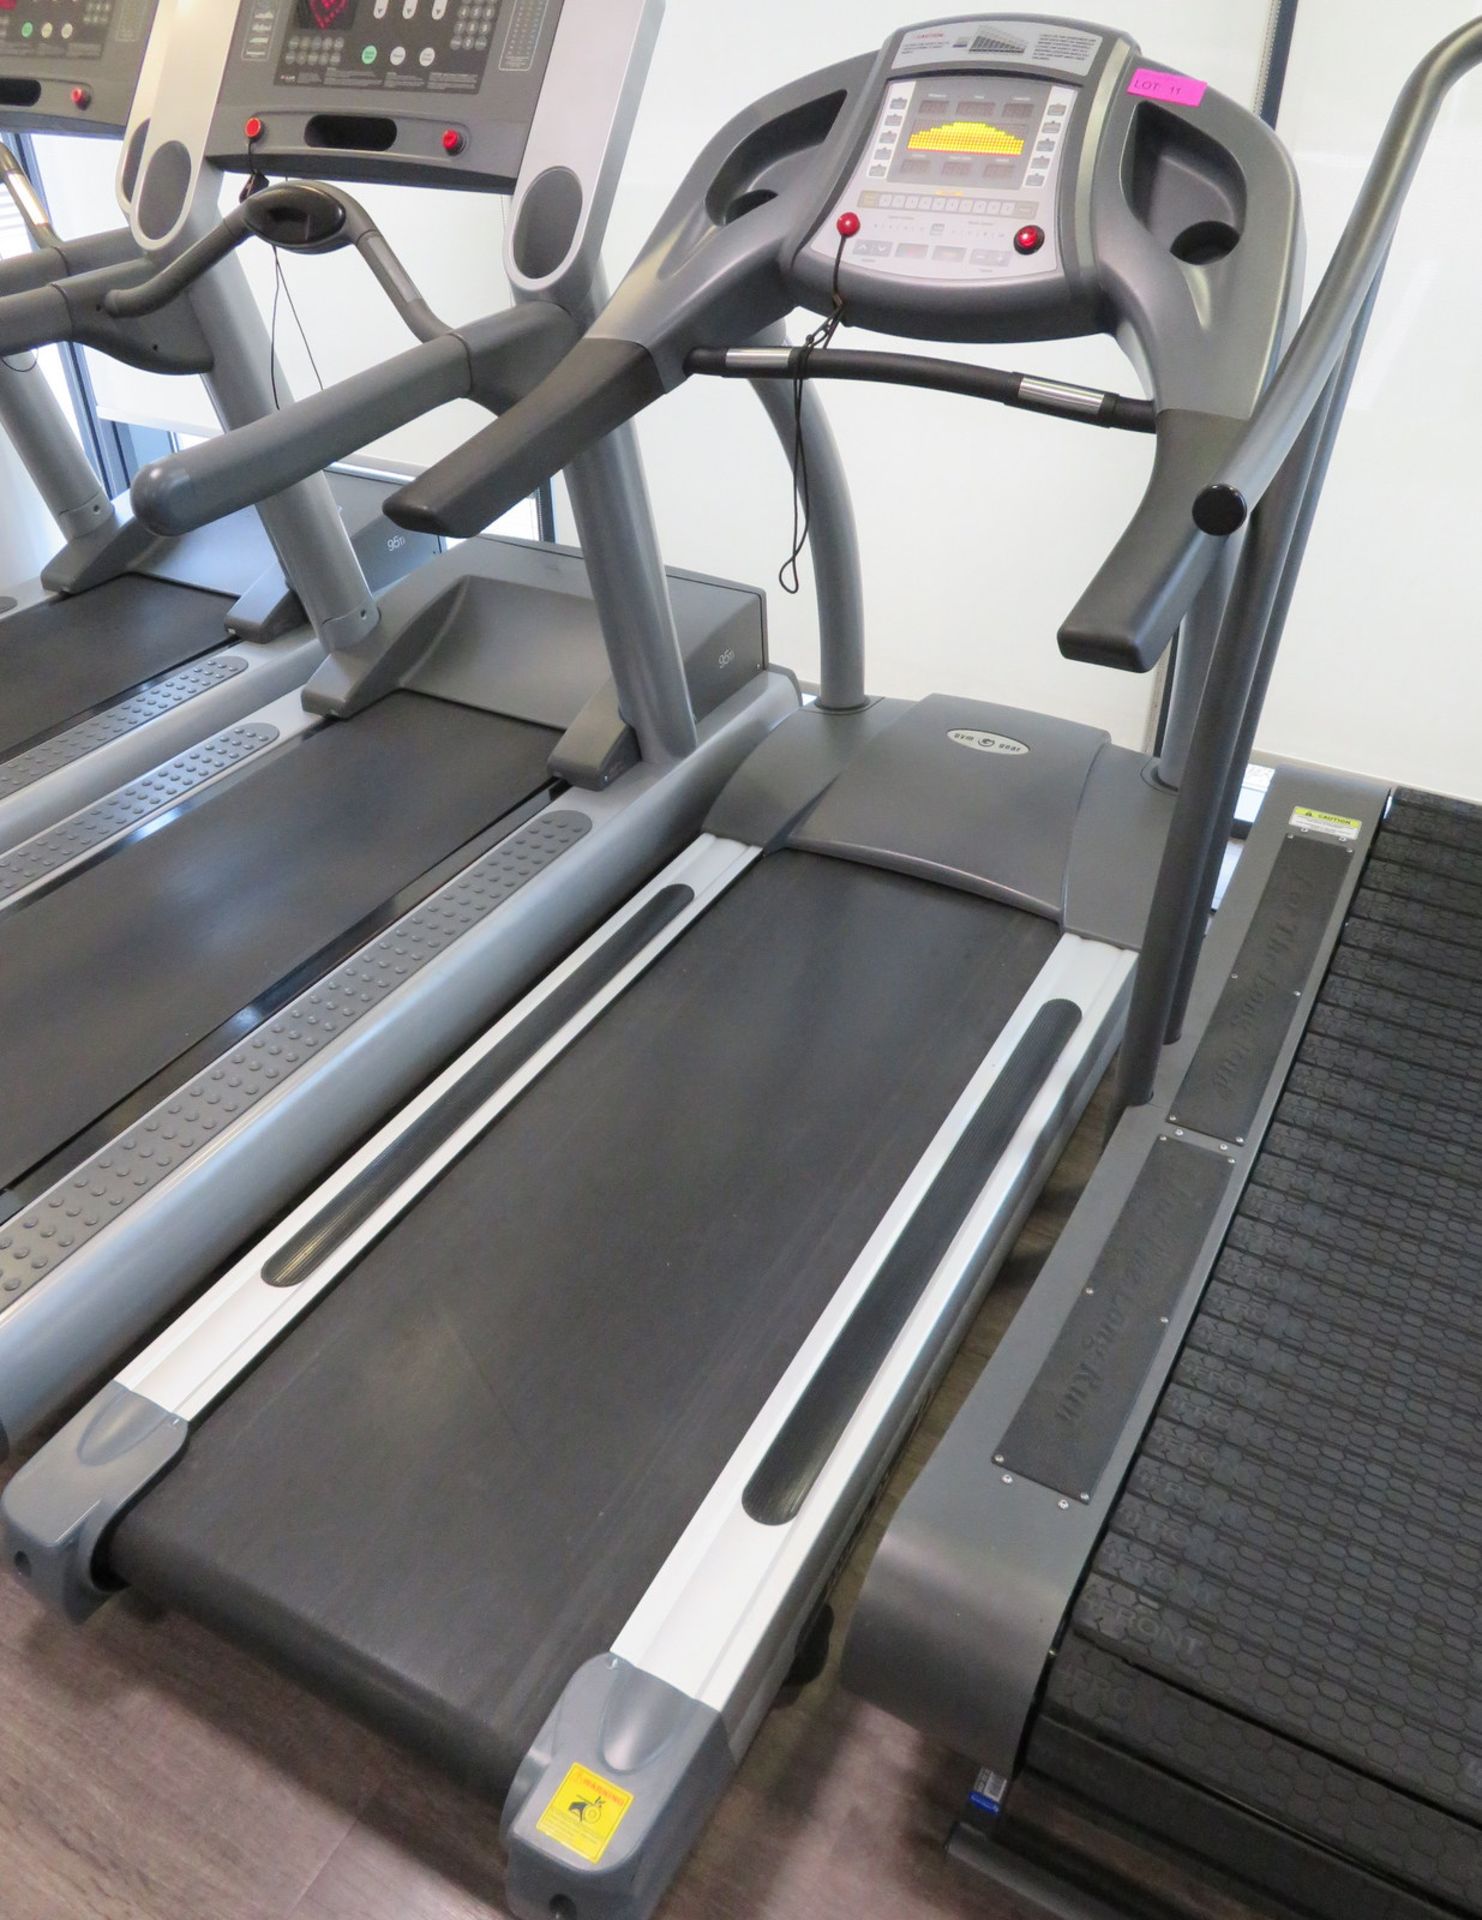 Gymgear Elite T-97 Treadmill. LED Display. Good Working Condition.